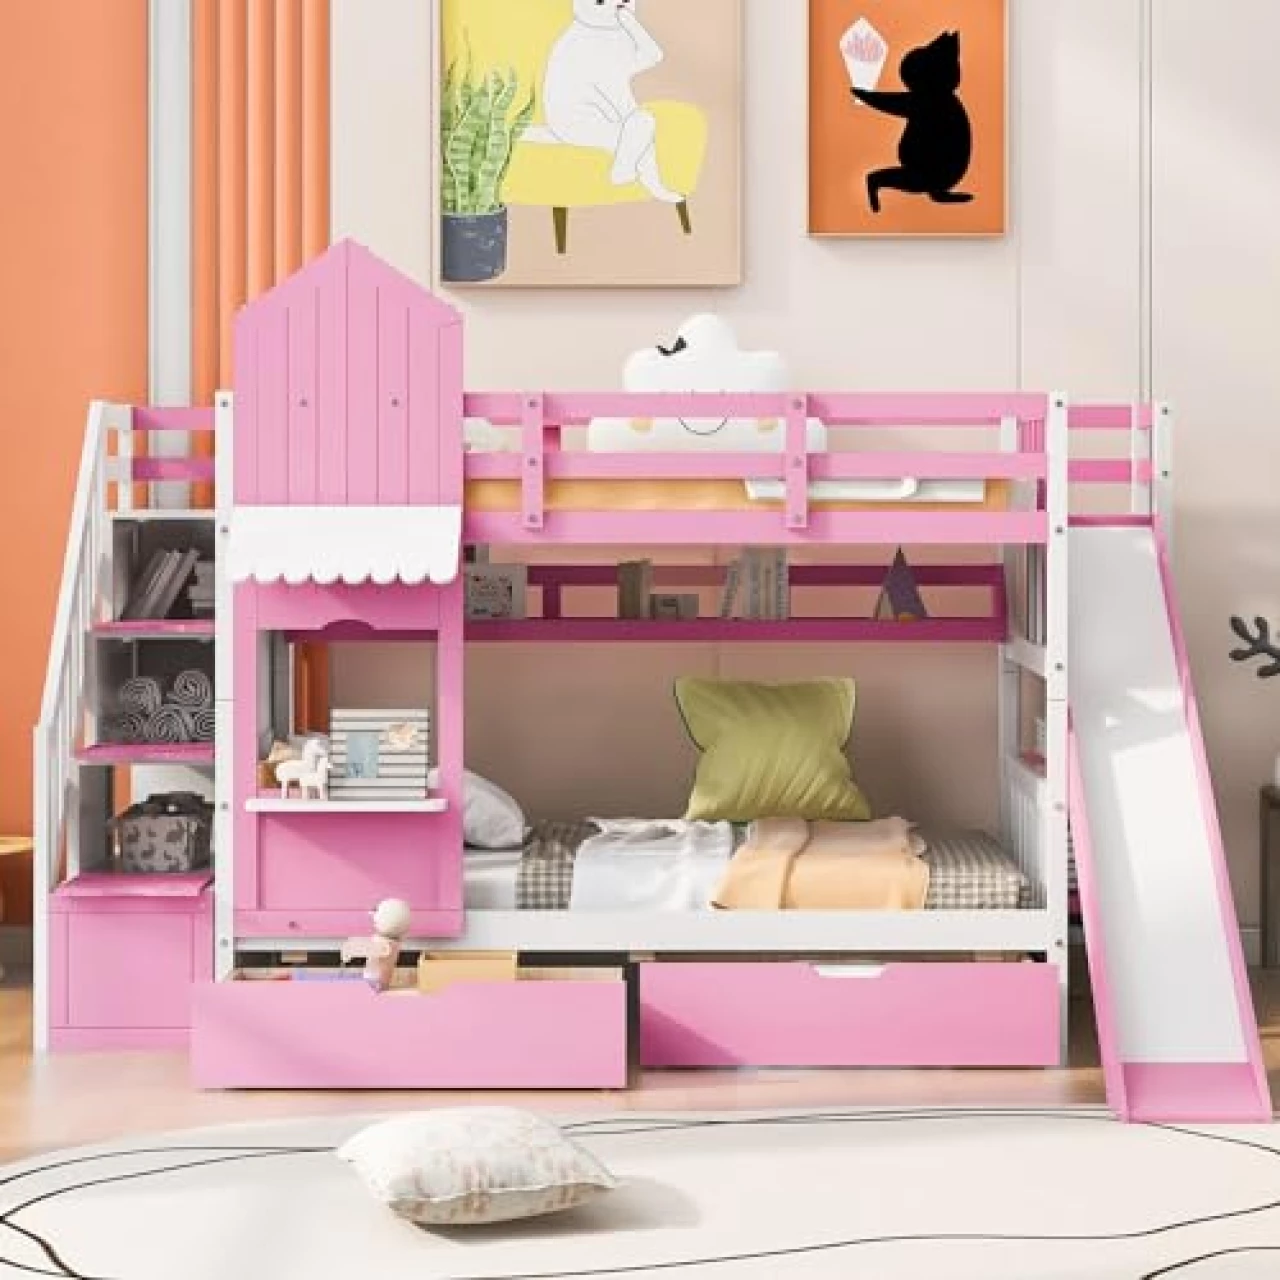 BIADNBZ Wooden Twin Over Twin Bunk Bed with Storage Stair and 2 Drawers,3 Shelves,Castle Style Kids BedFrame with Bookshelf and Slide for Bedroom,Pink